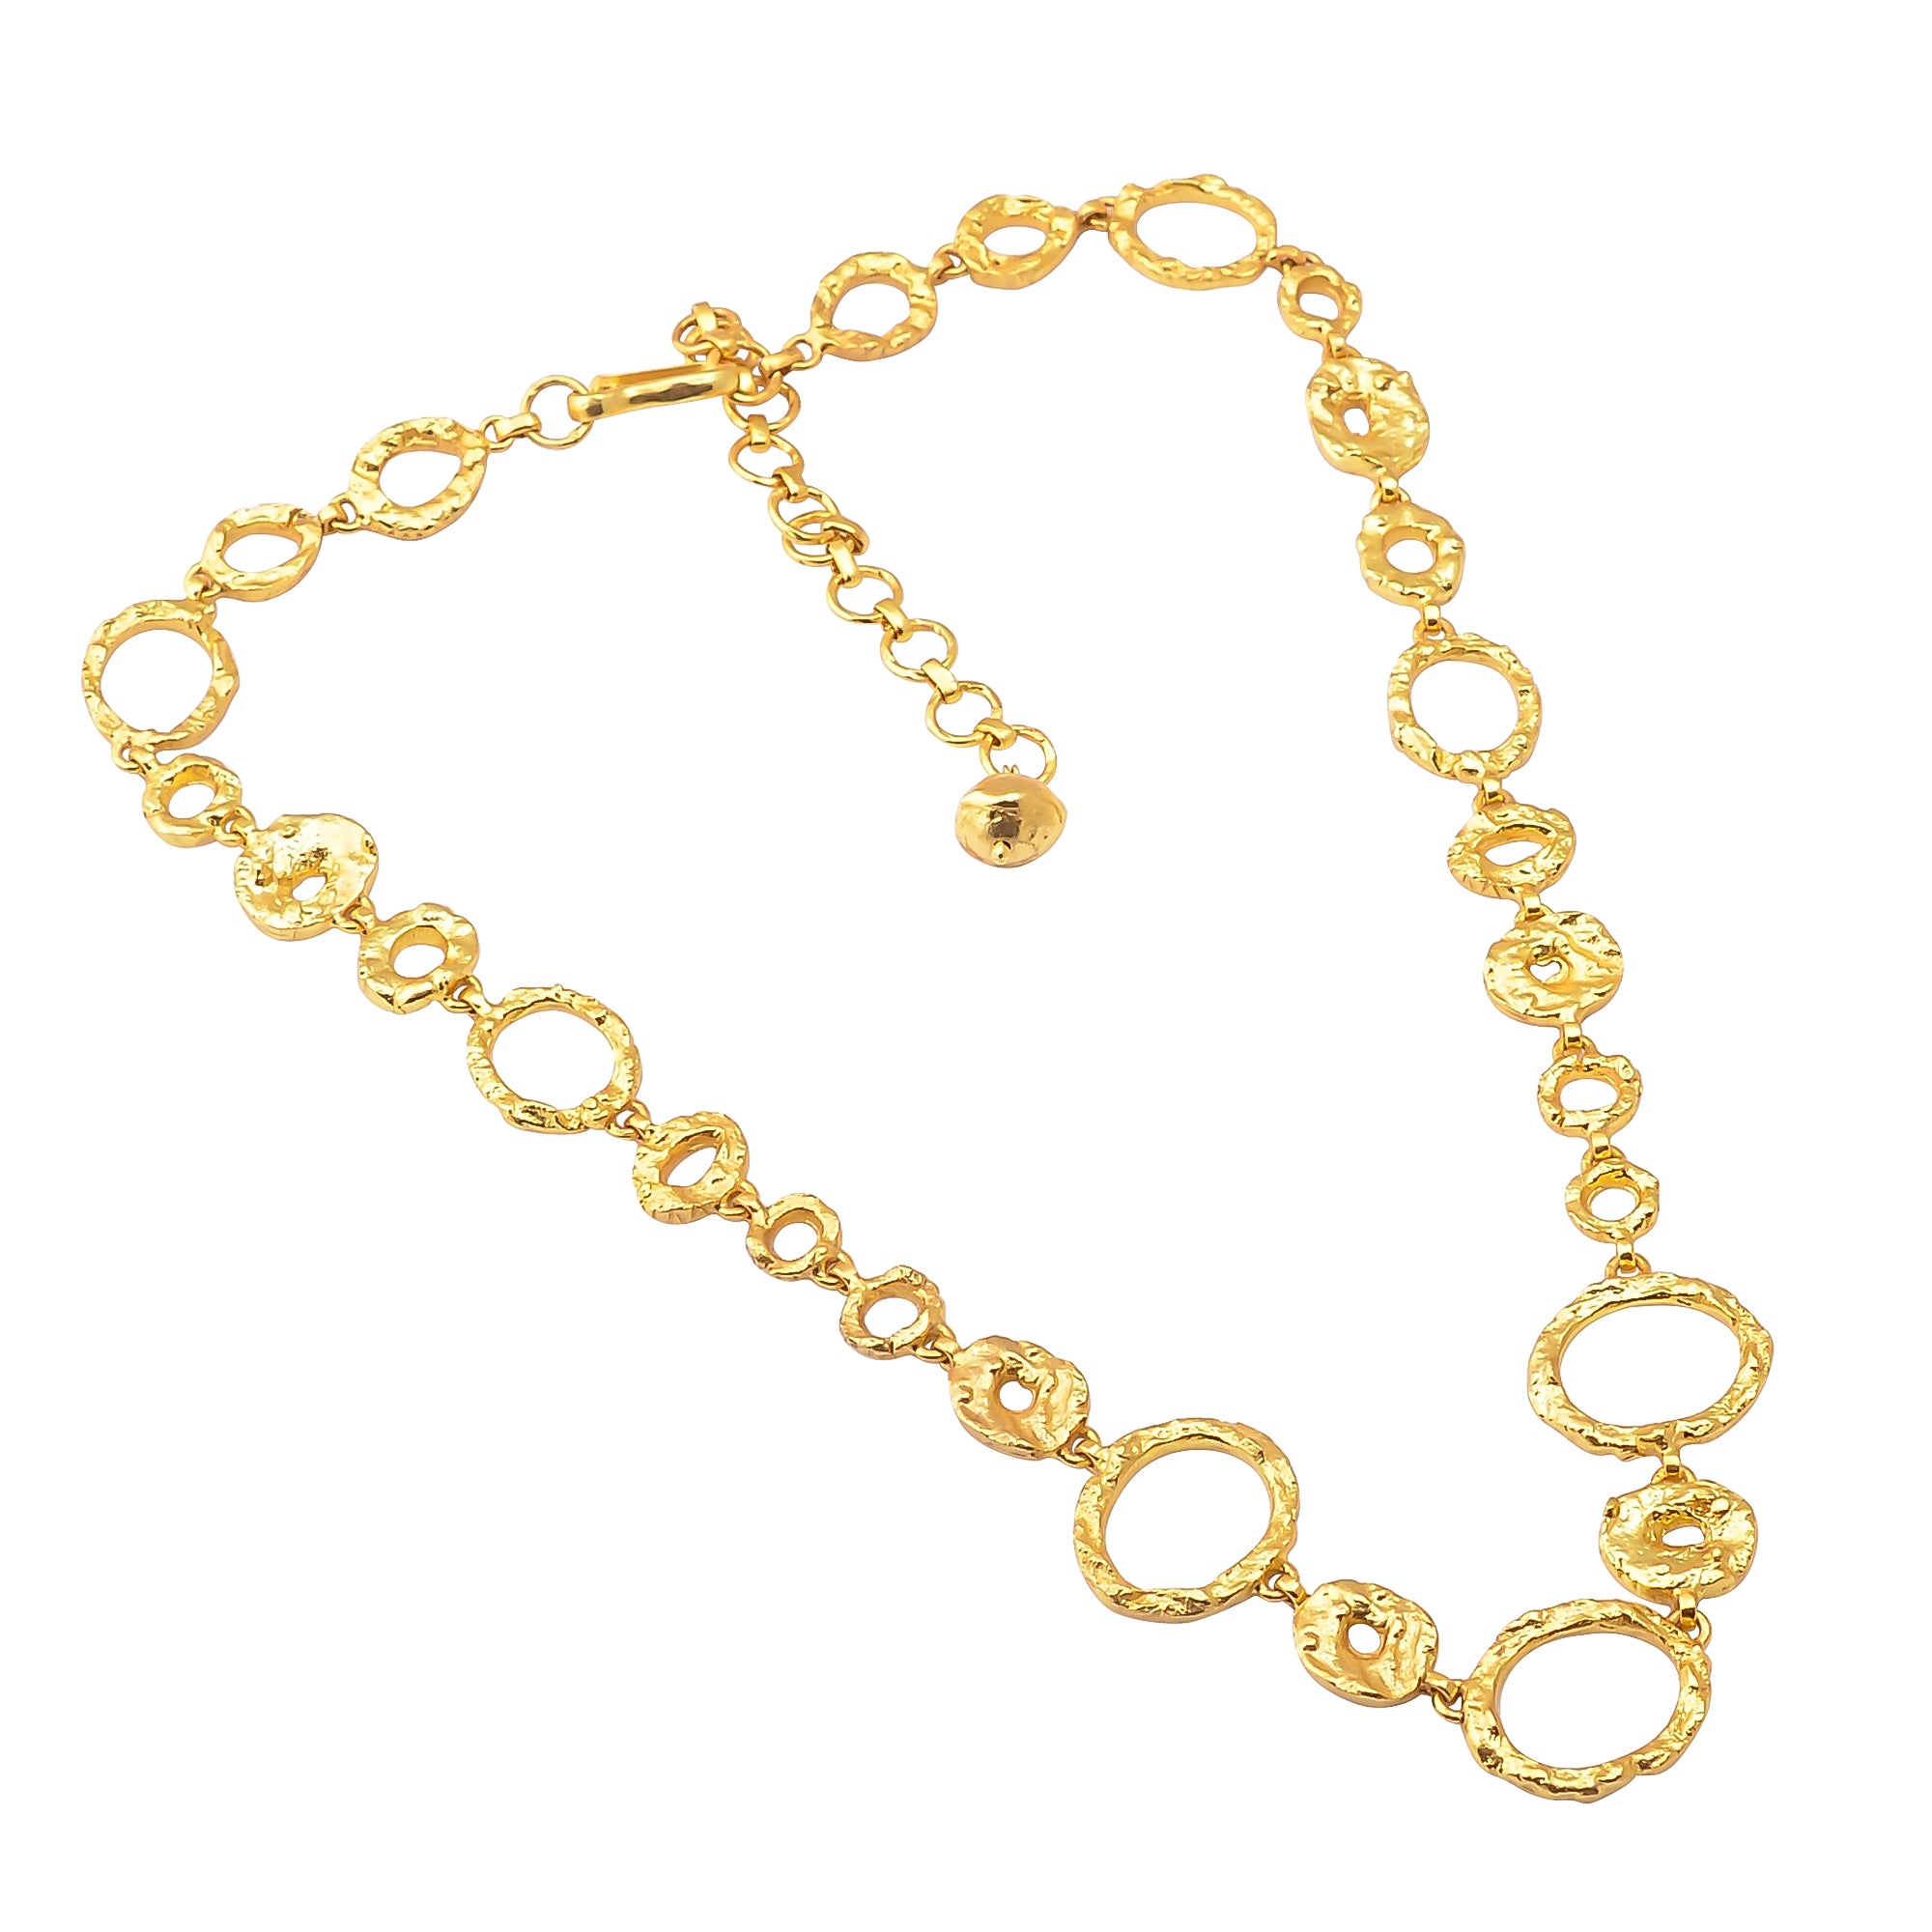 Buy Handmade Silver Gold Plated Beaten Disk Necklace